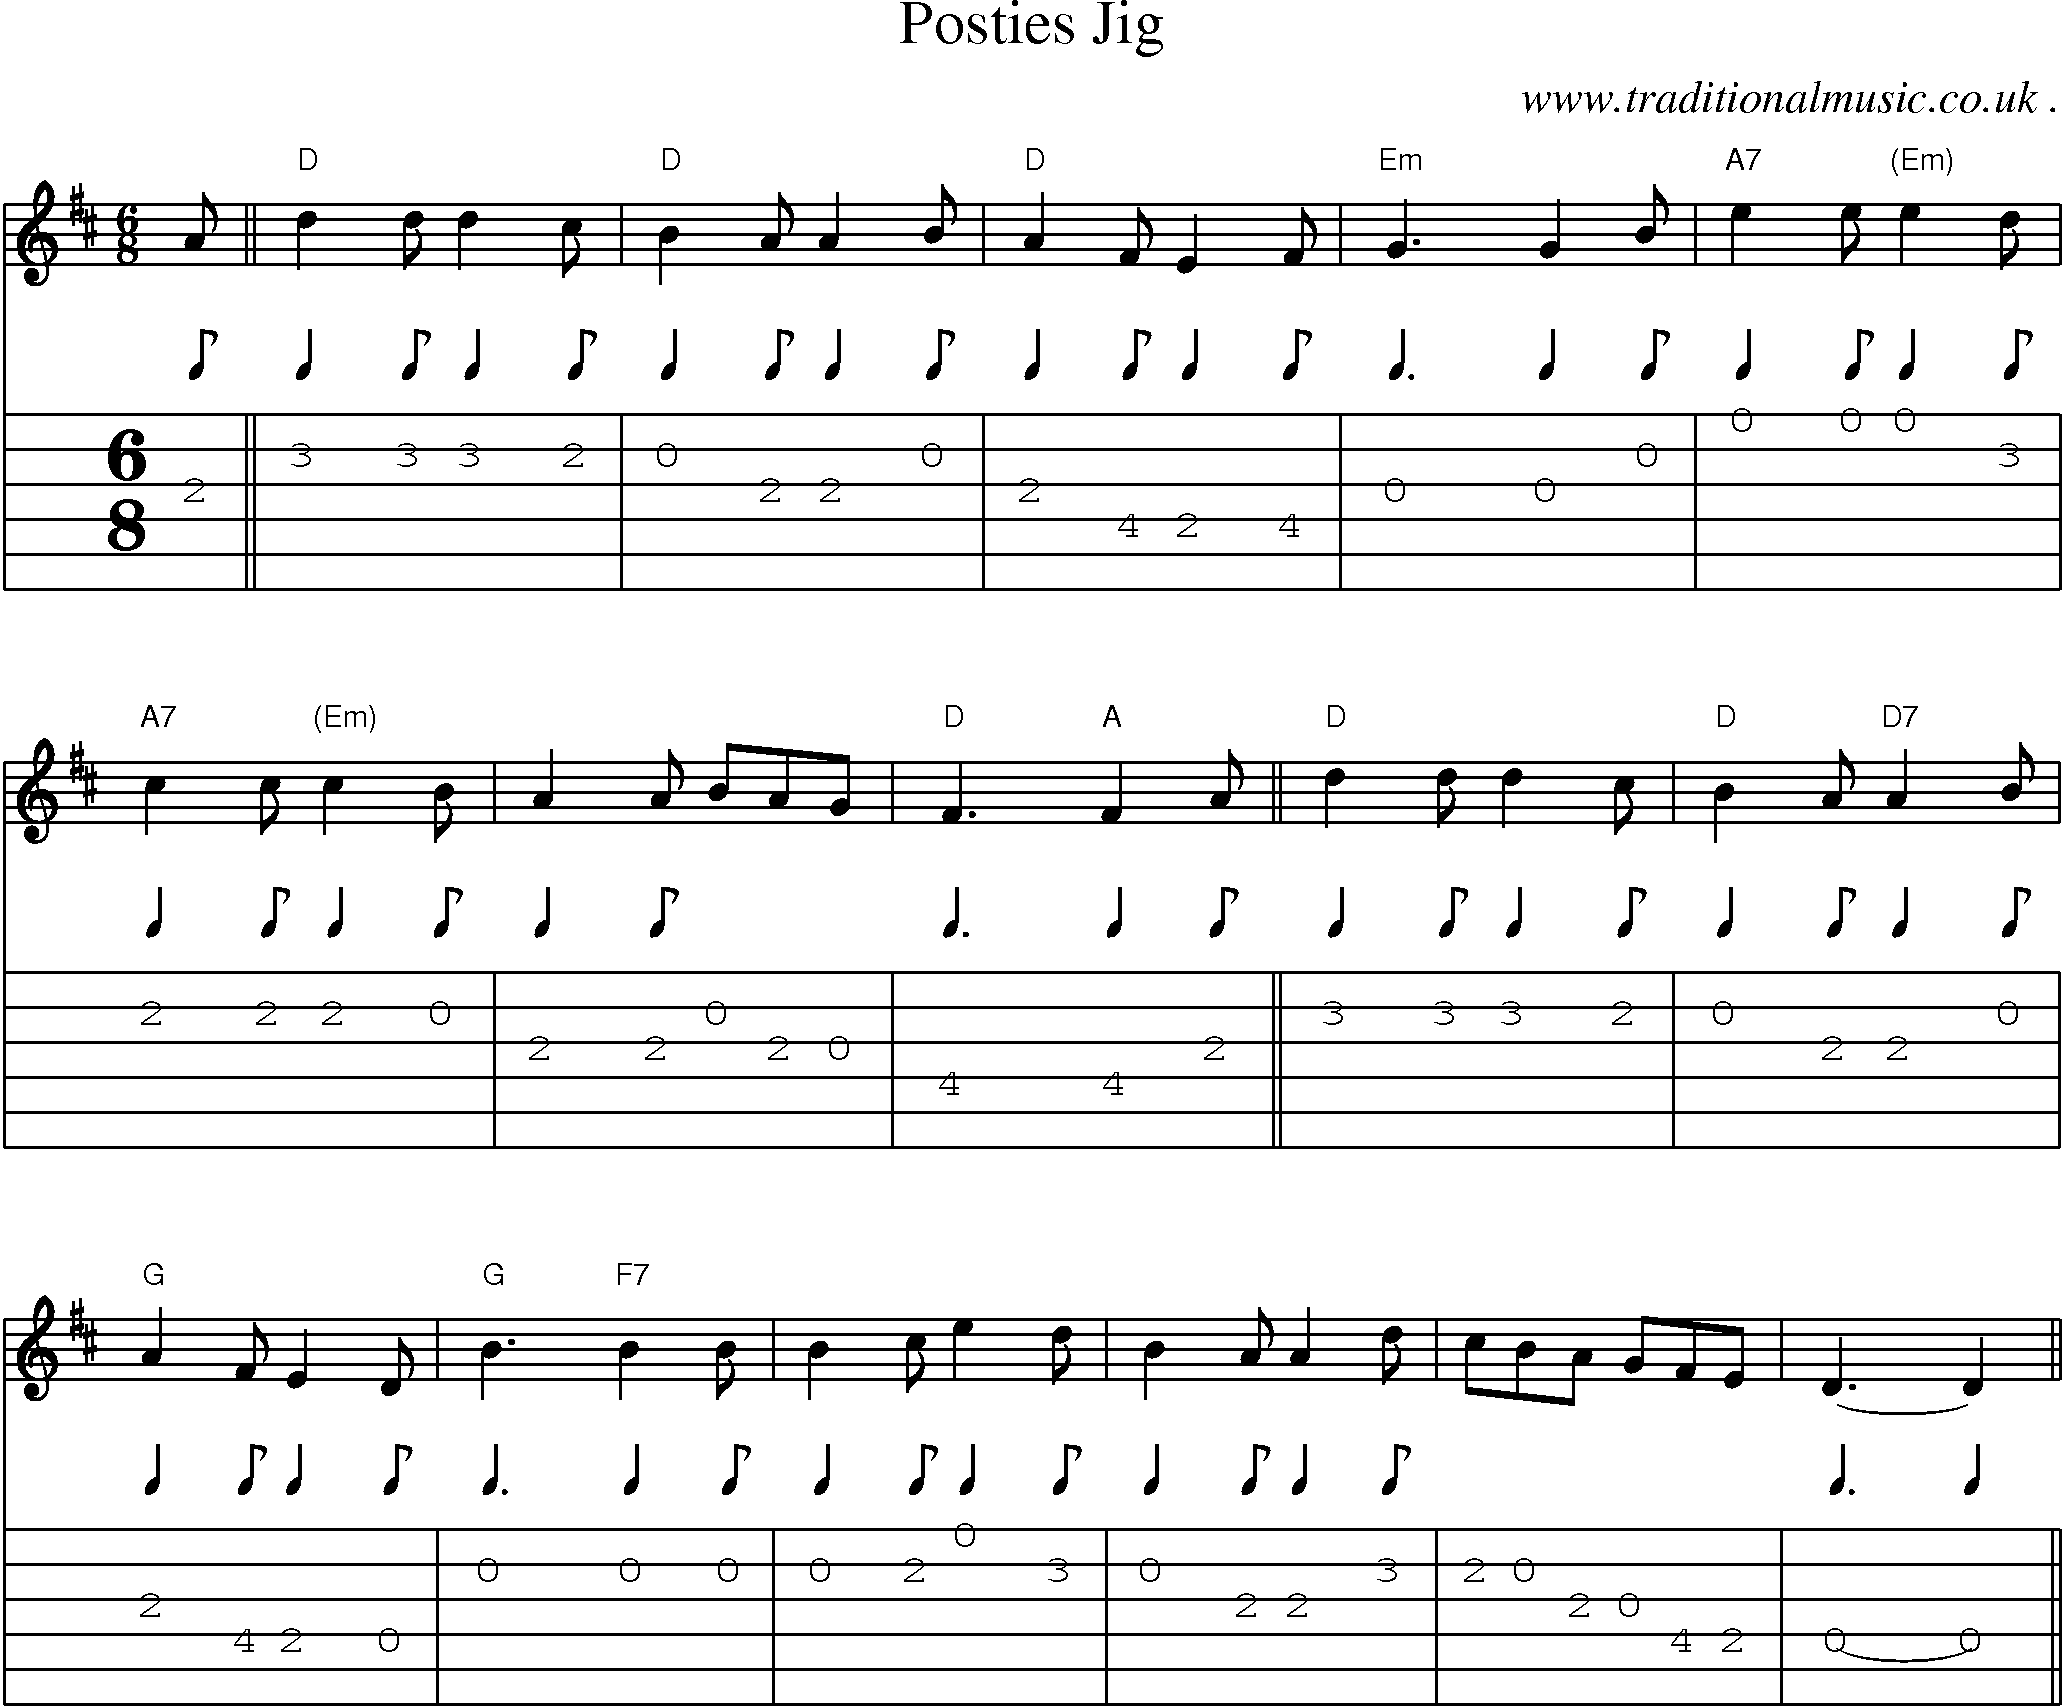 Sheet-music  score, Chords and Guitar Tabs for Posties Jig